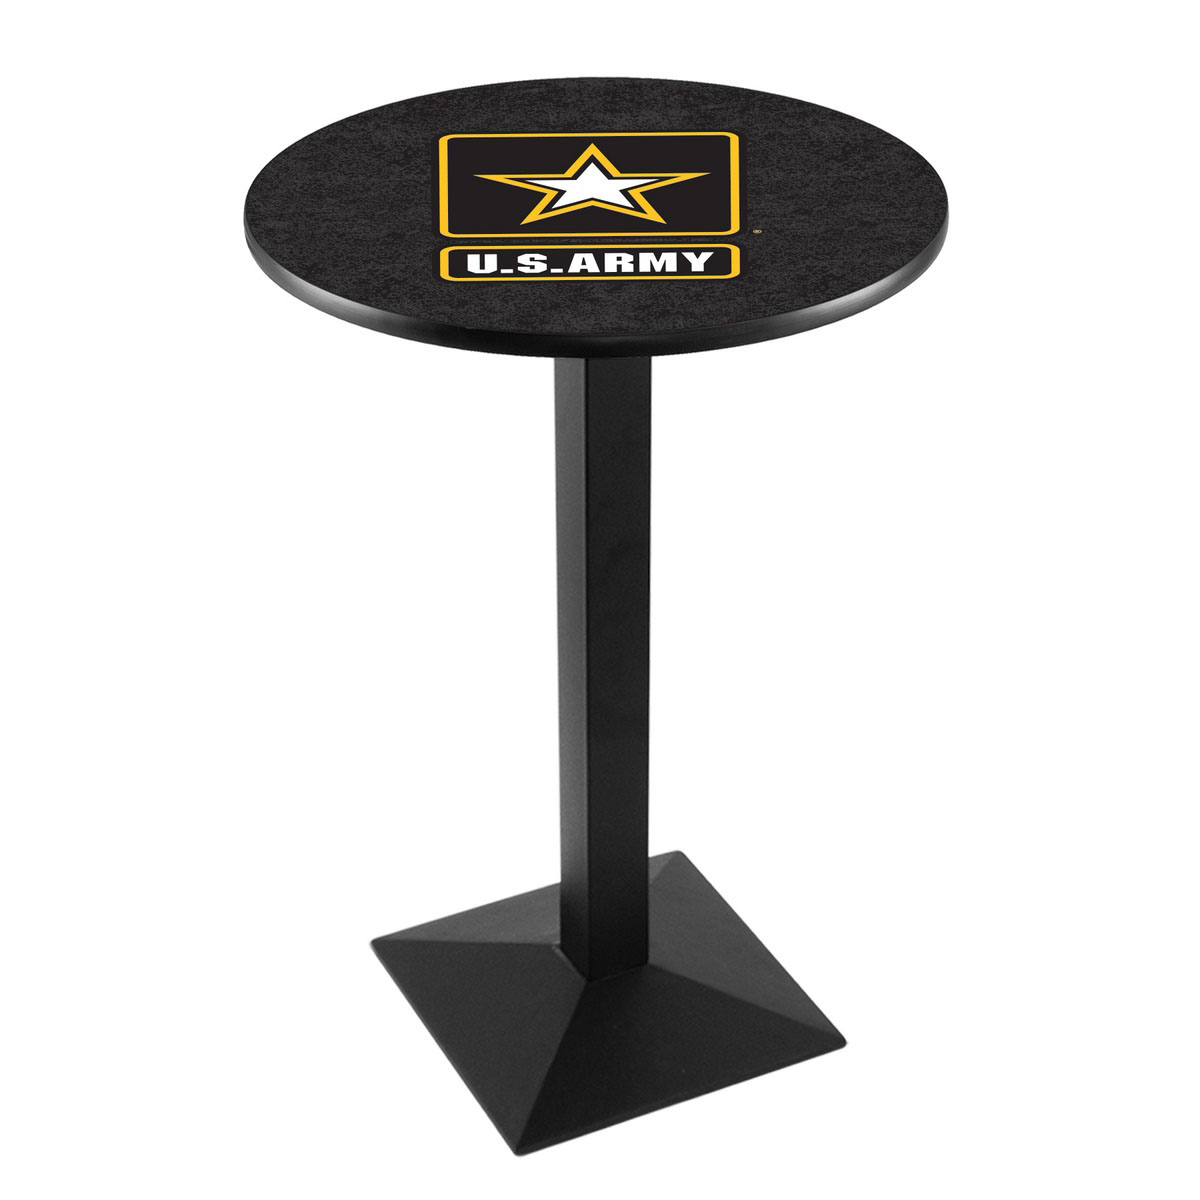 United States Army Logo Pub Bar Table With Square Stand